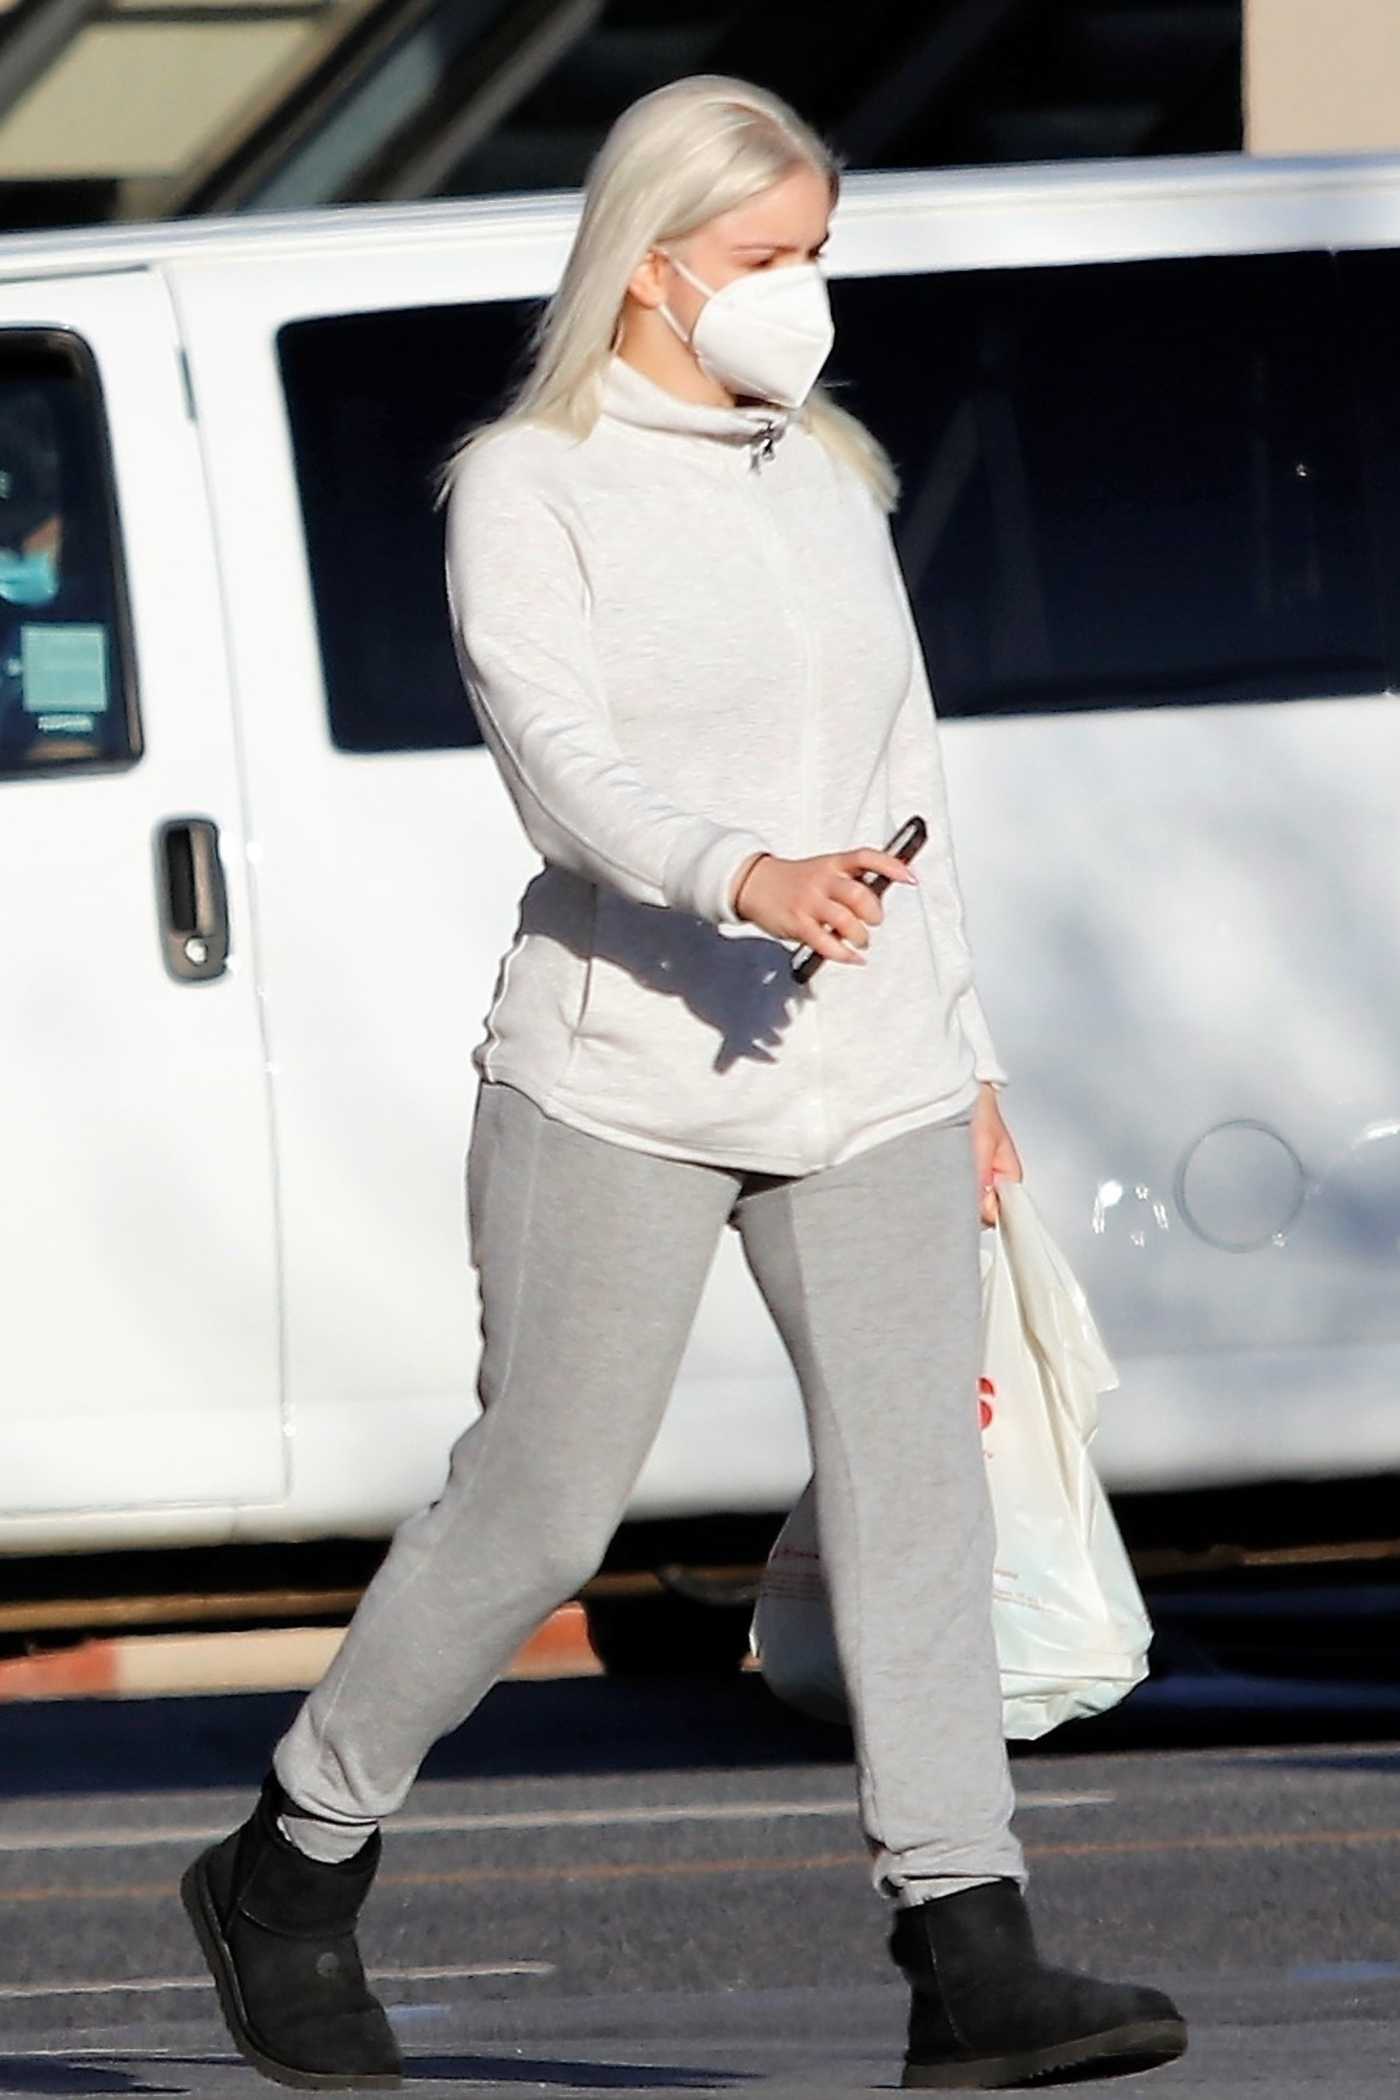 Ariel Winter in a Grey Sweatpants Goes Shopping at CVS in Los Angeles 03/05/2021